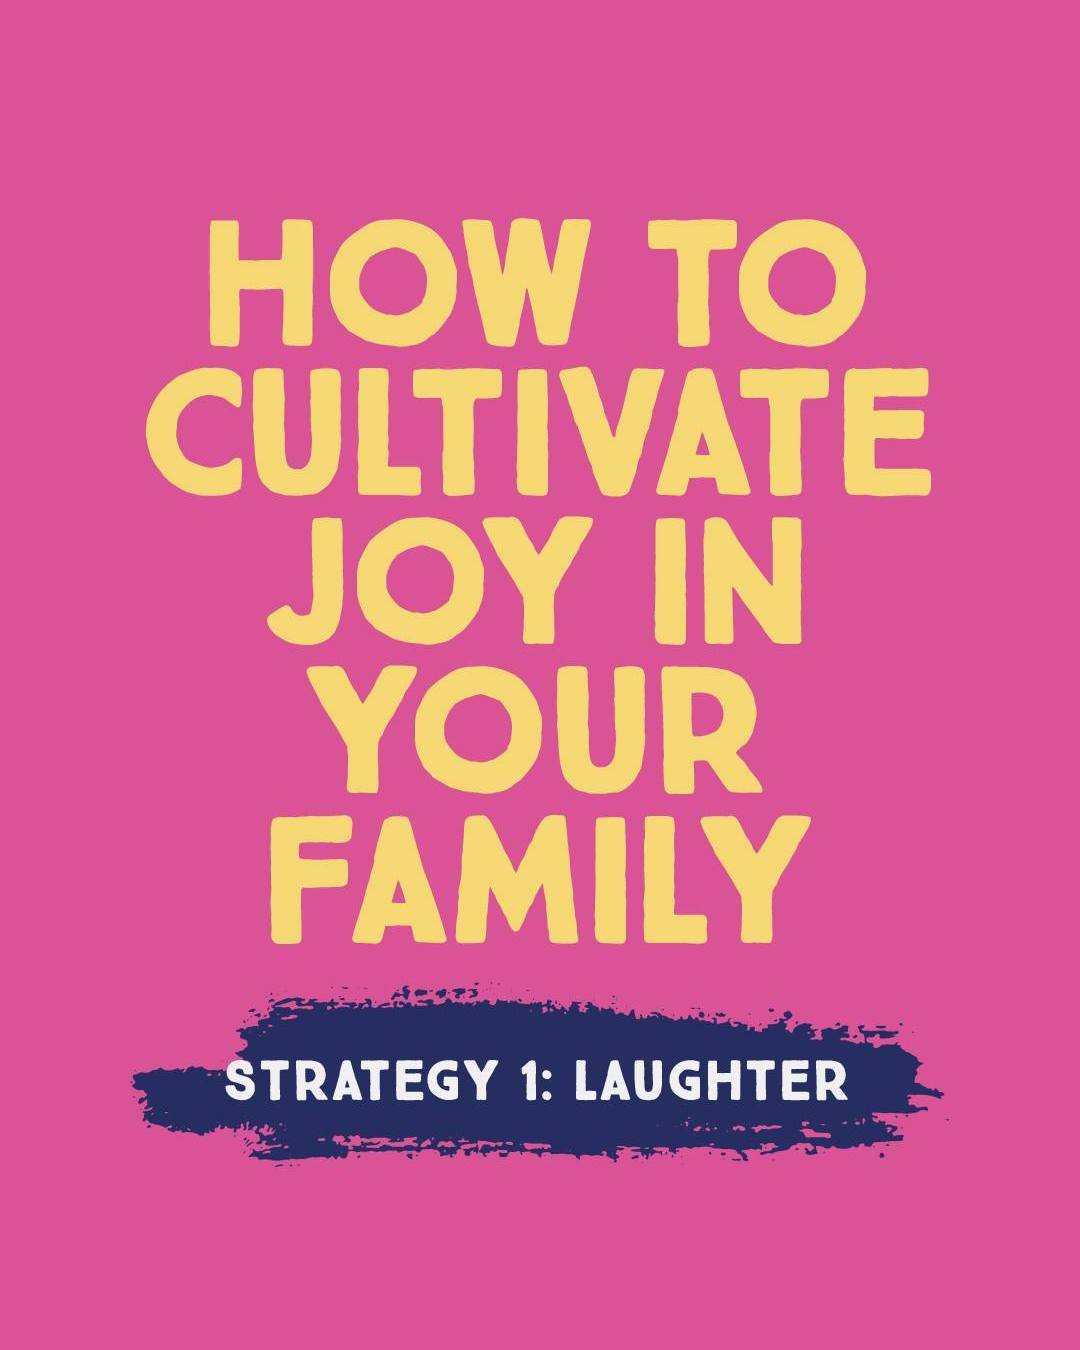 Embrace Joy in Your Family: Proverbs teaches us that God cherished laughter. Let's cultivate moments of joy and lightness in our homes, whether intentional or spontaneous. 🩷